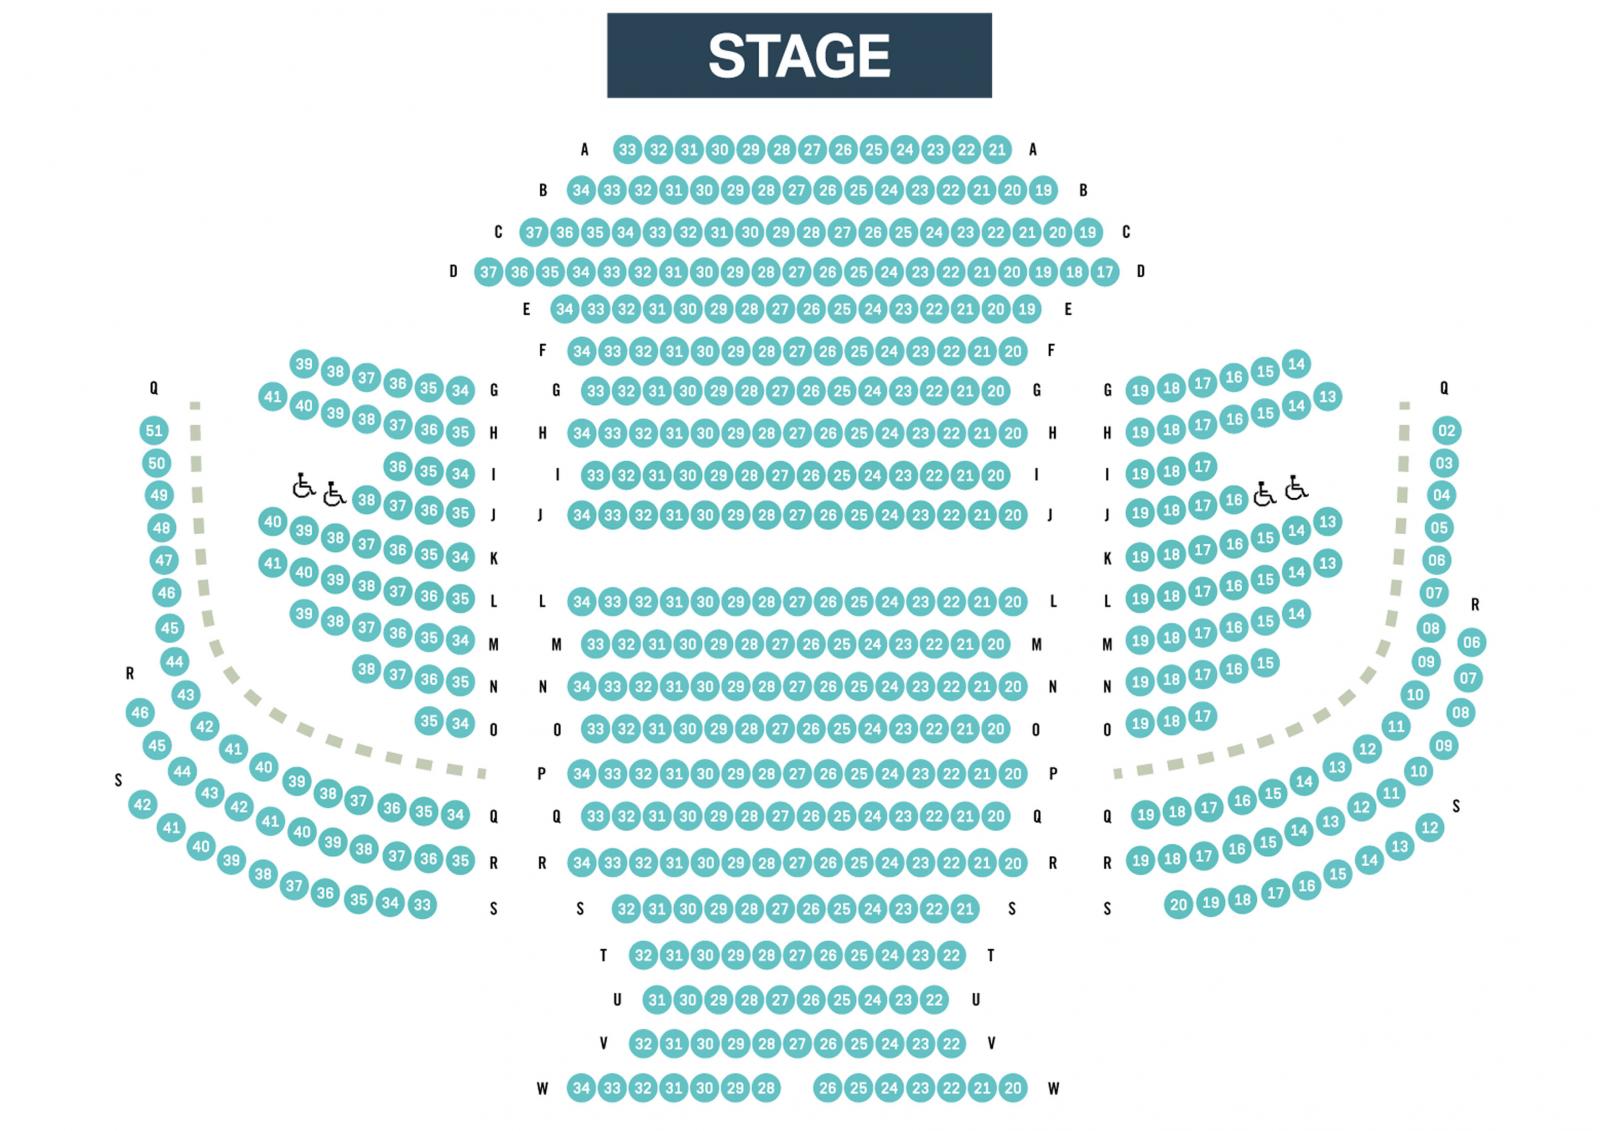 seating-plan-the-nuffield-theatre.jpg